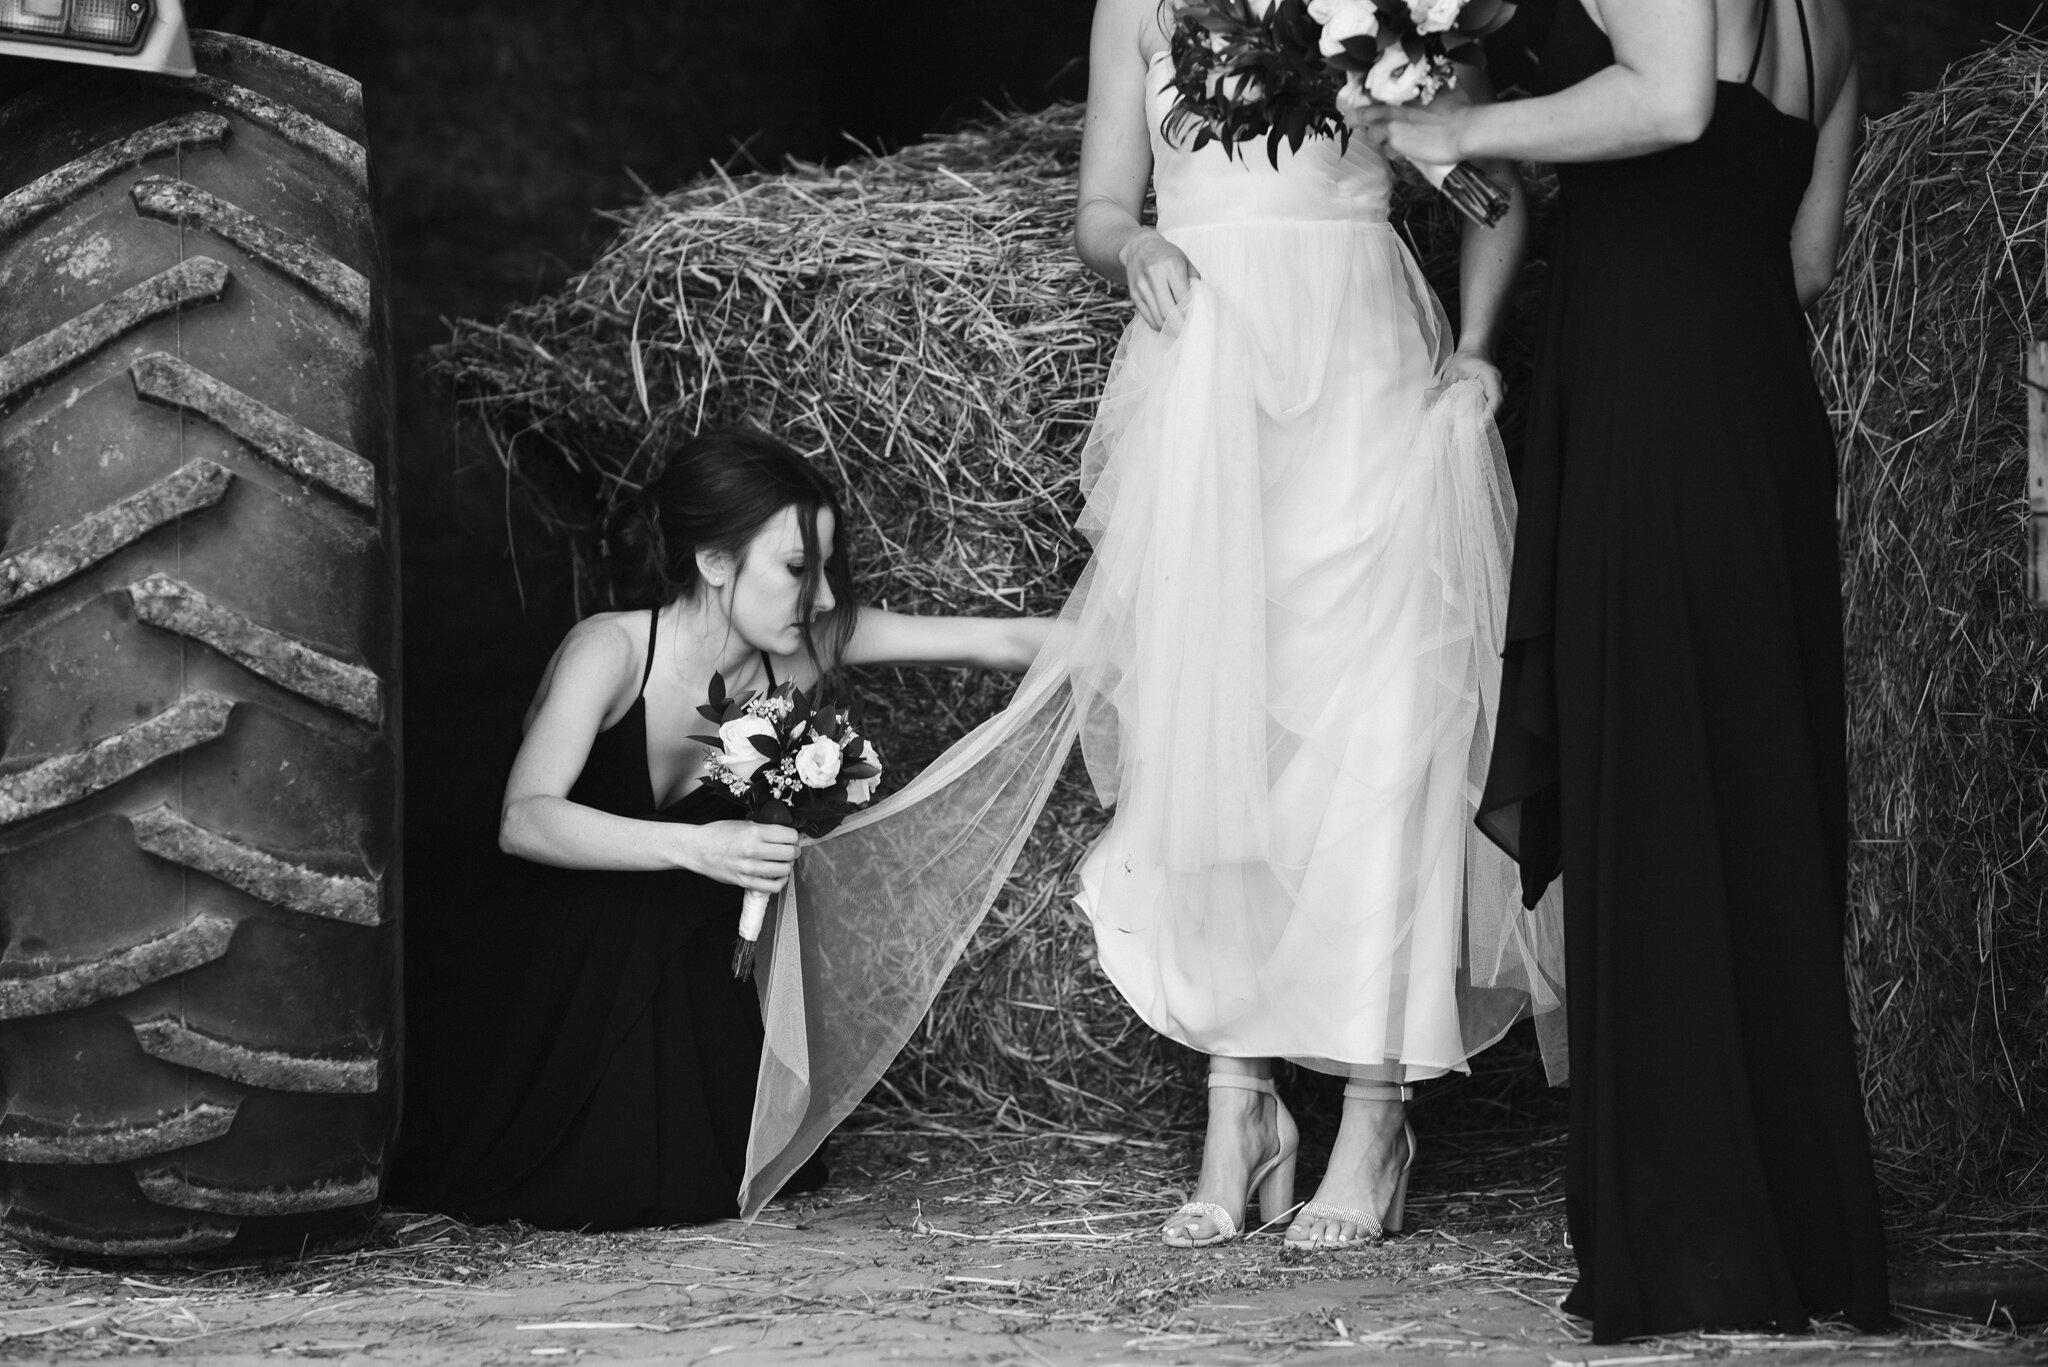 Bridal party helps with brides dress in barn before wedding